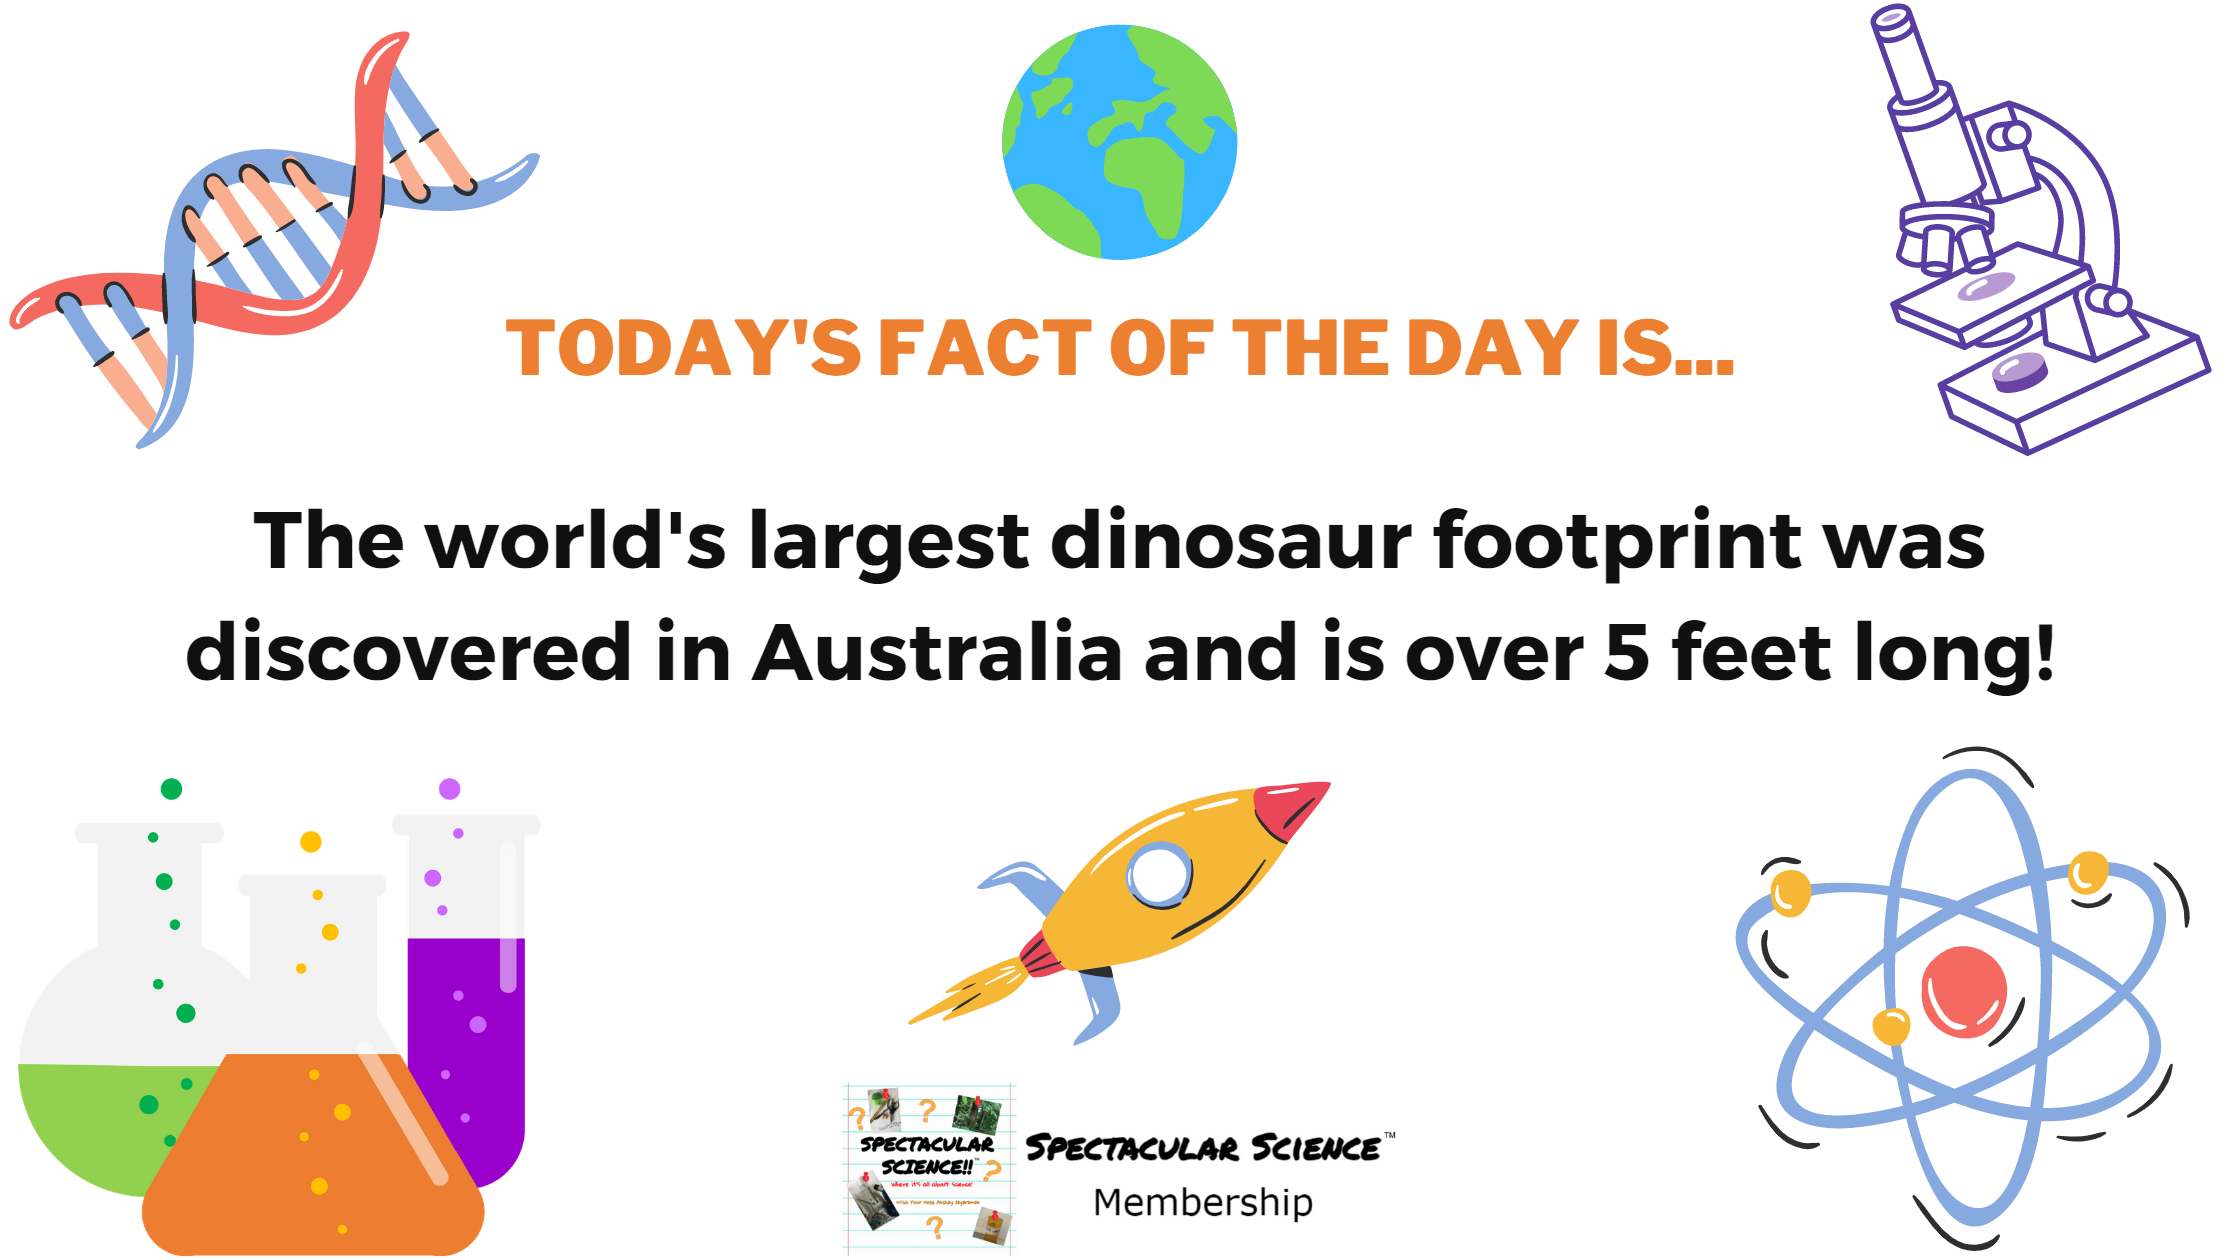 Fact of the Day Image March 13th